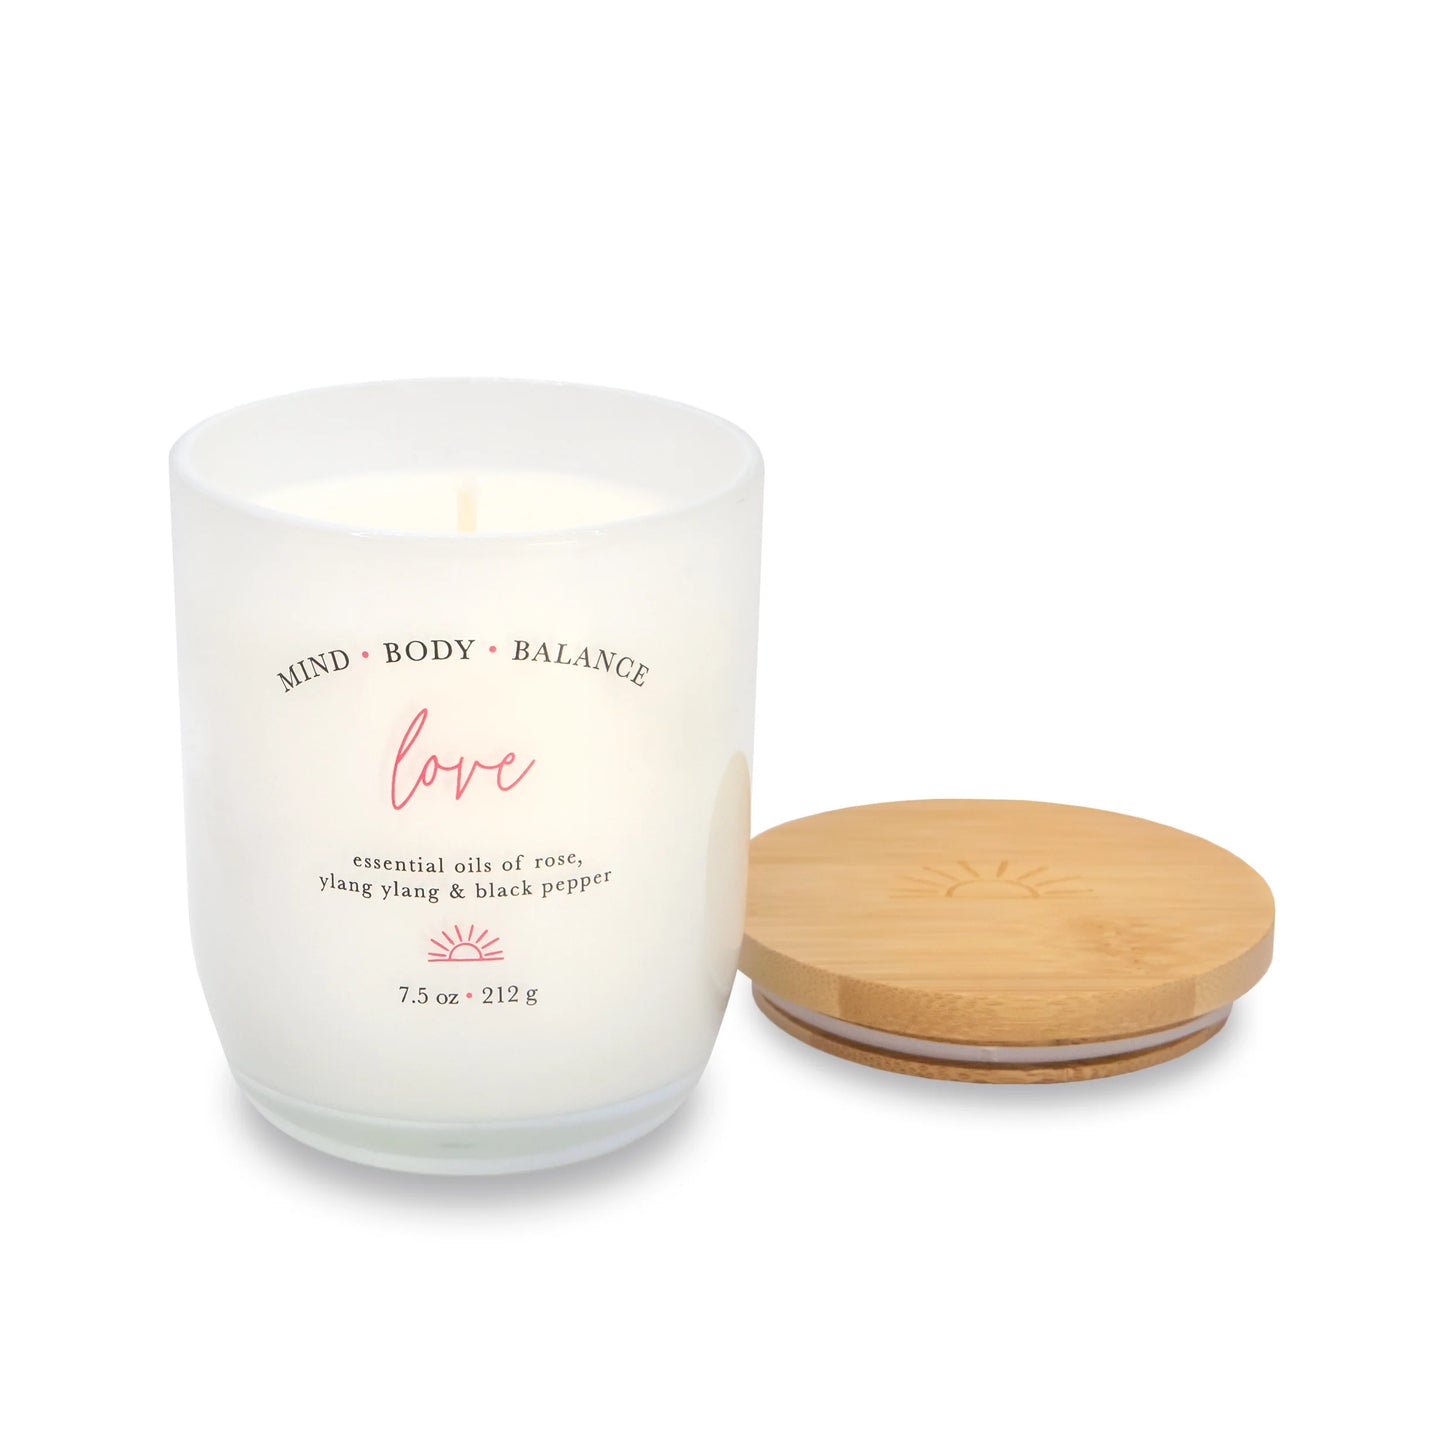 Love Aromatherapy Candle